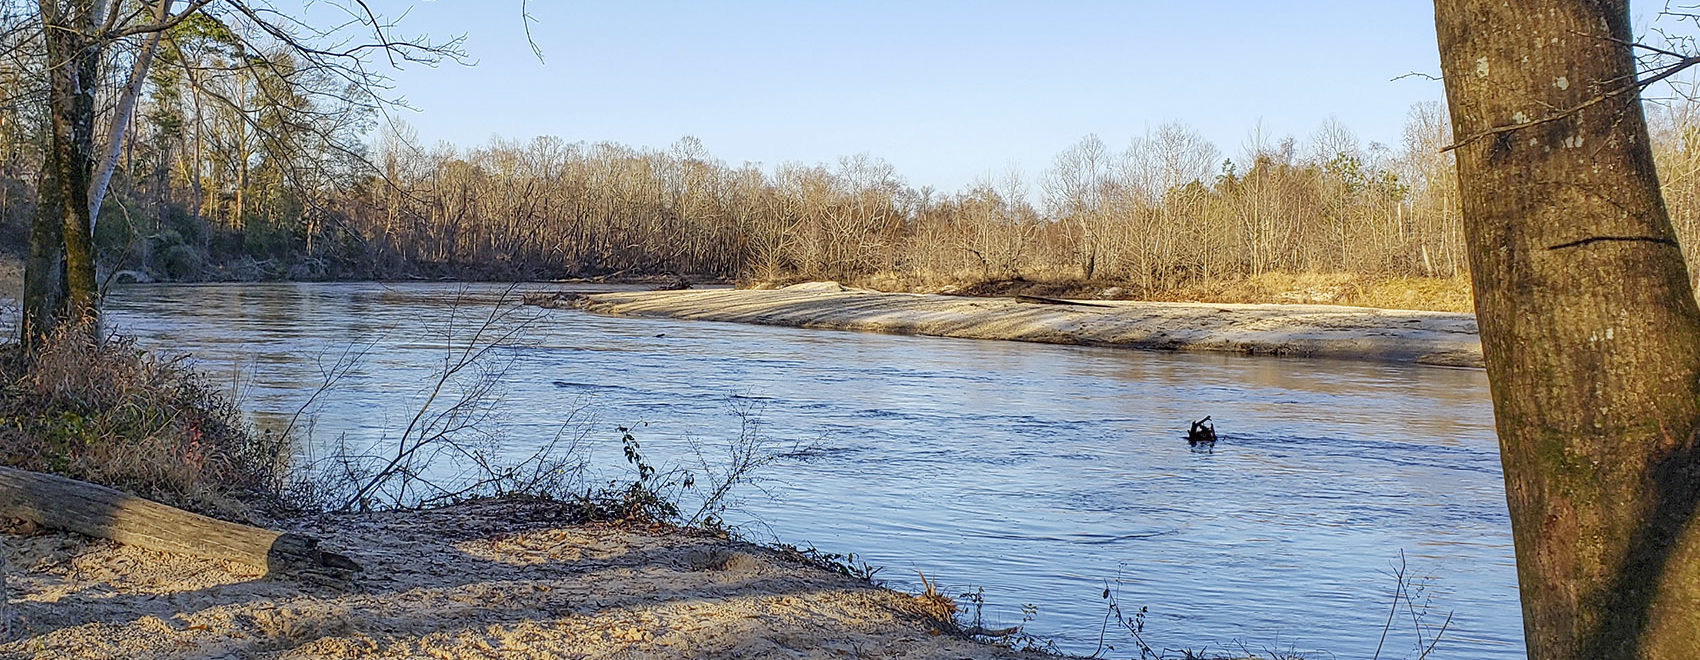 Bogue Chitto State Park and river with trees